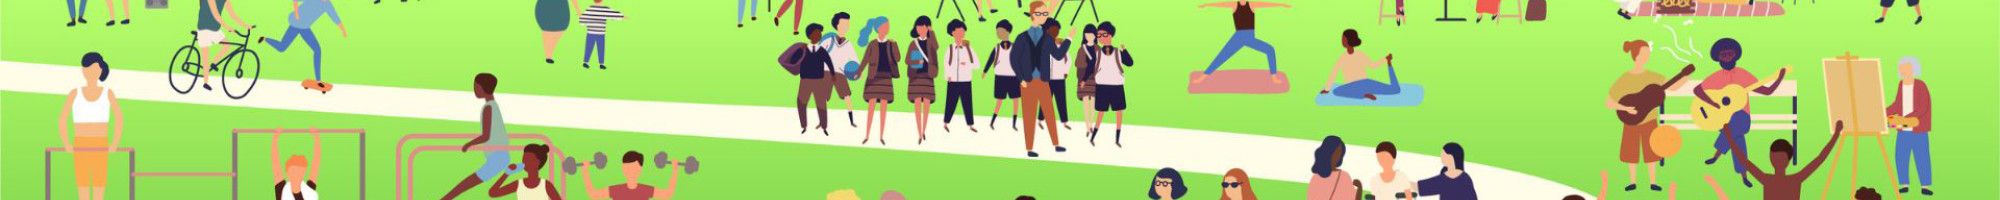 stylised illustration of people in a park